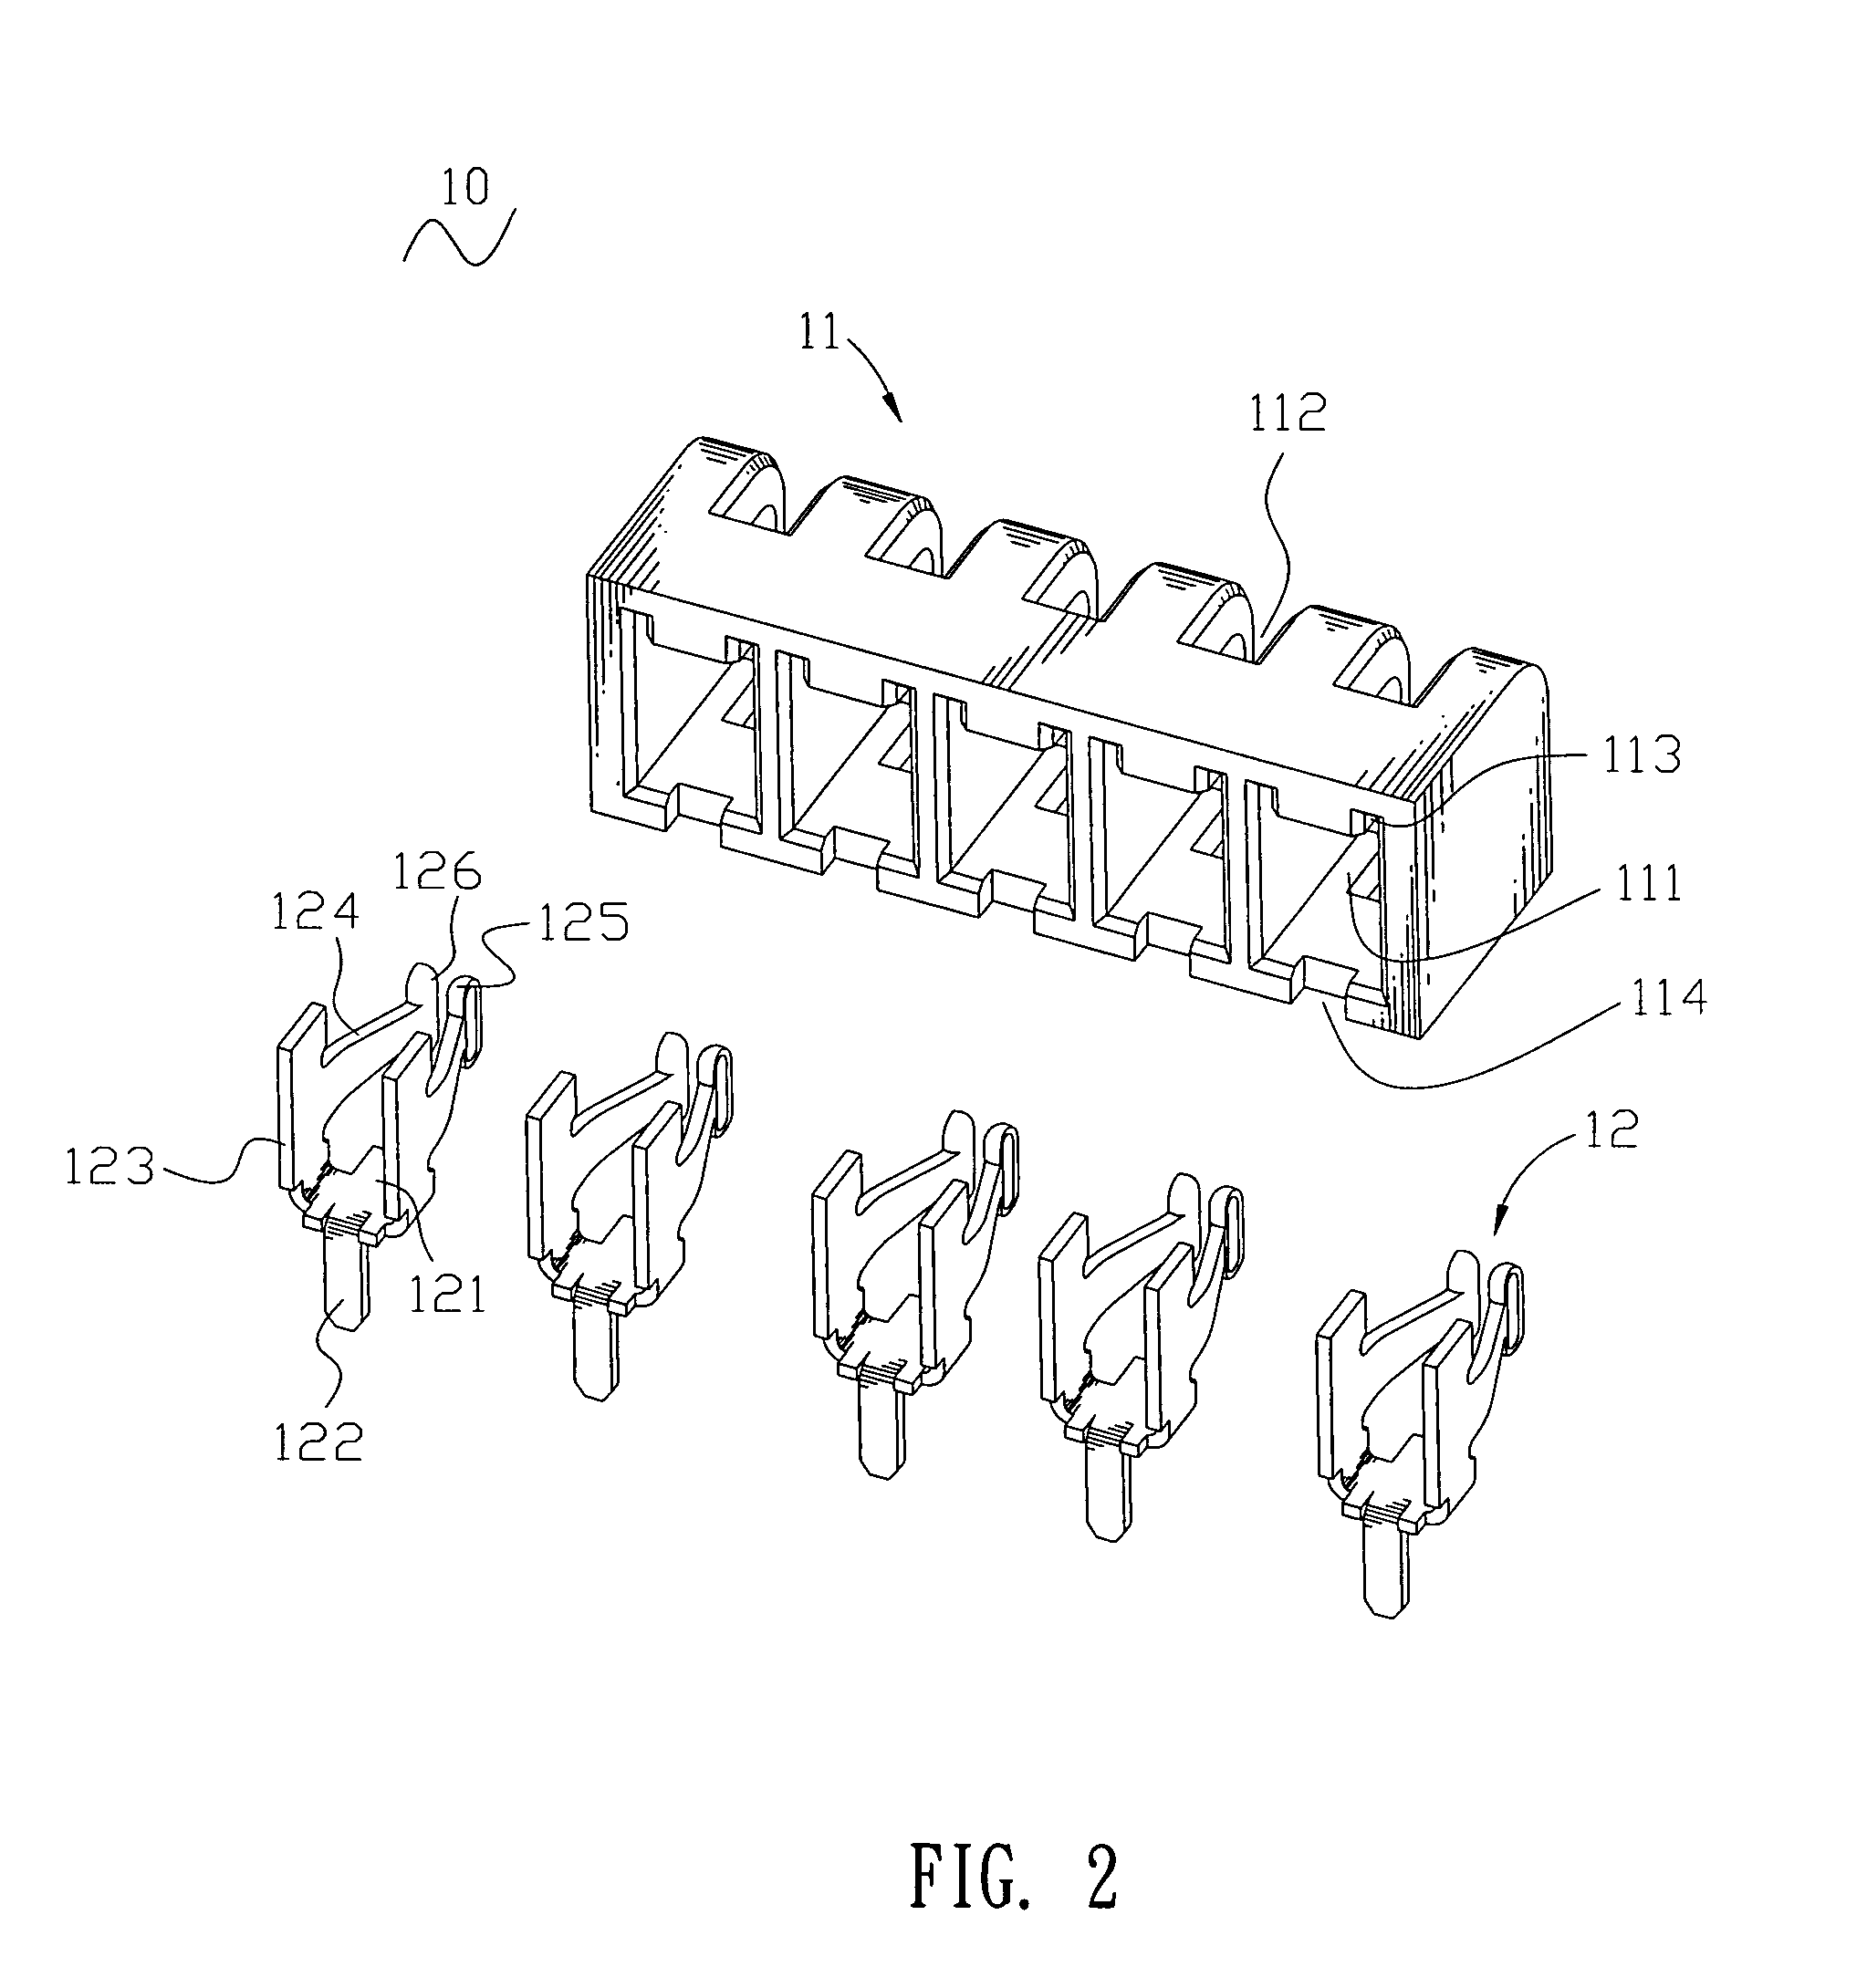 Combination of connector assembly and two printed circuit boards